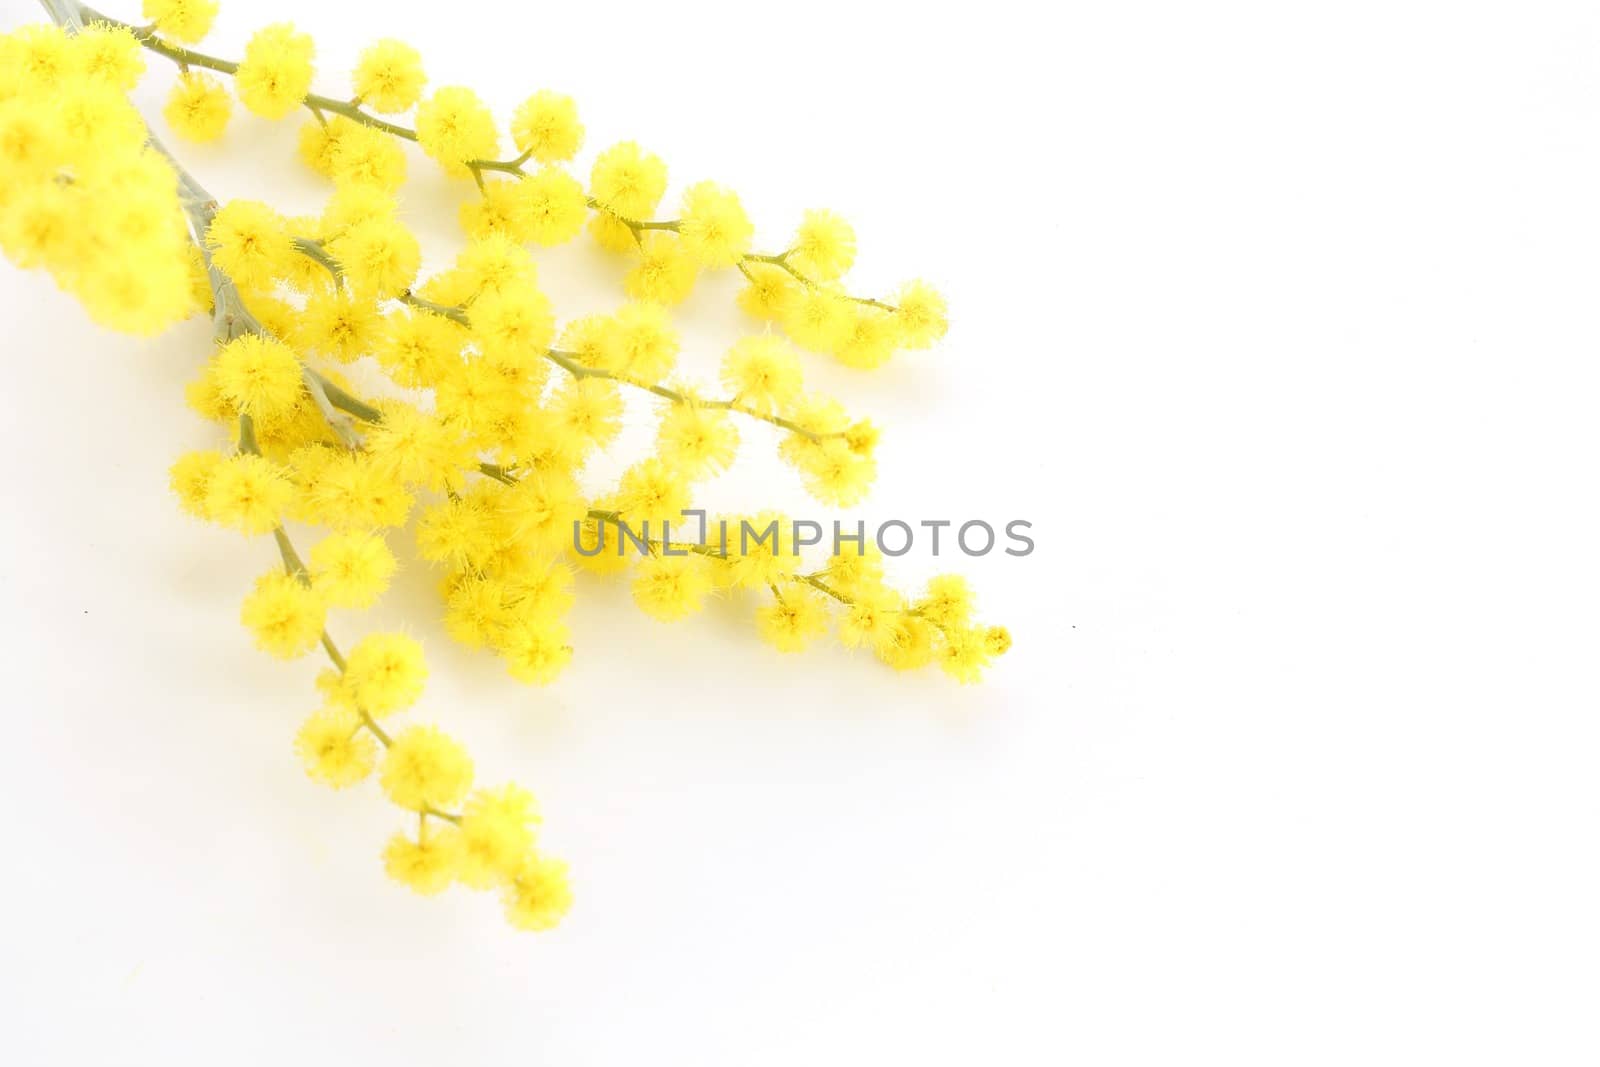 Mimosa isolated on white